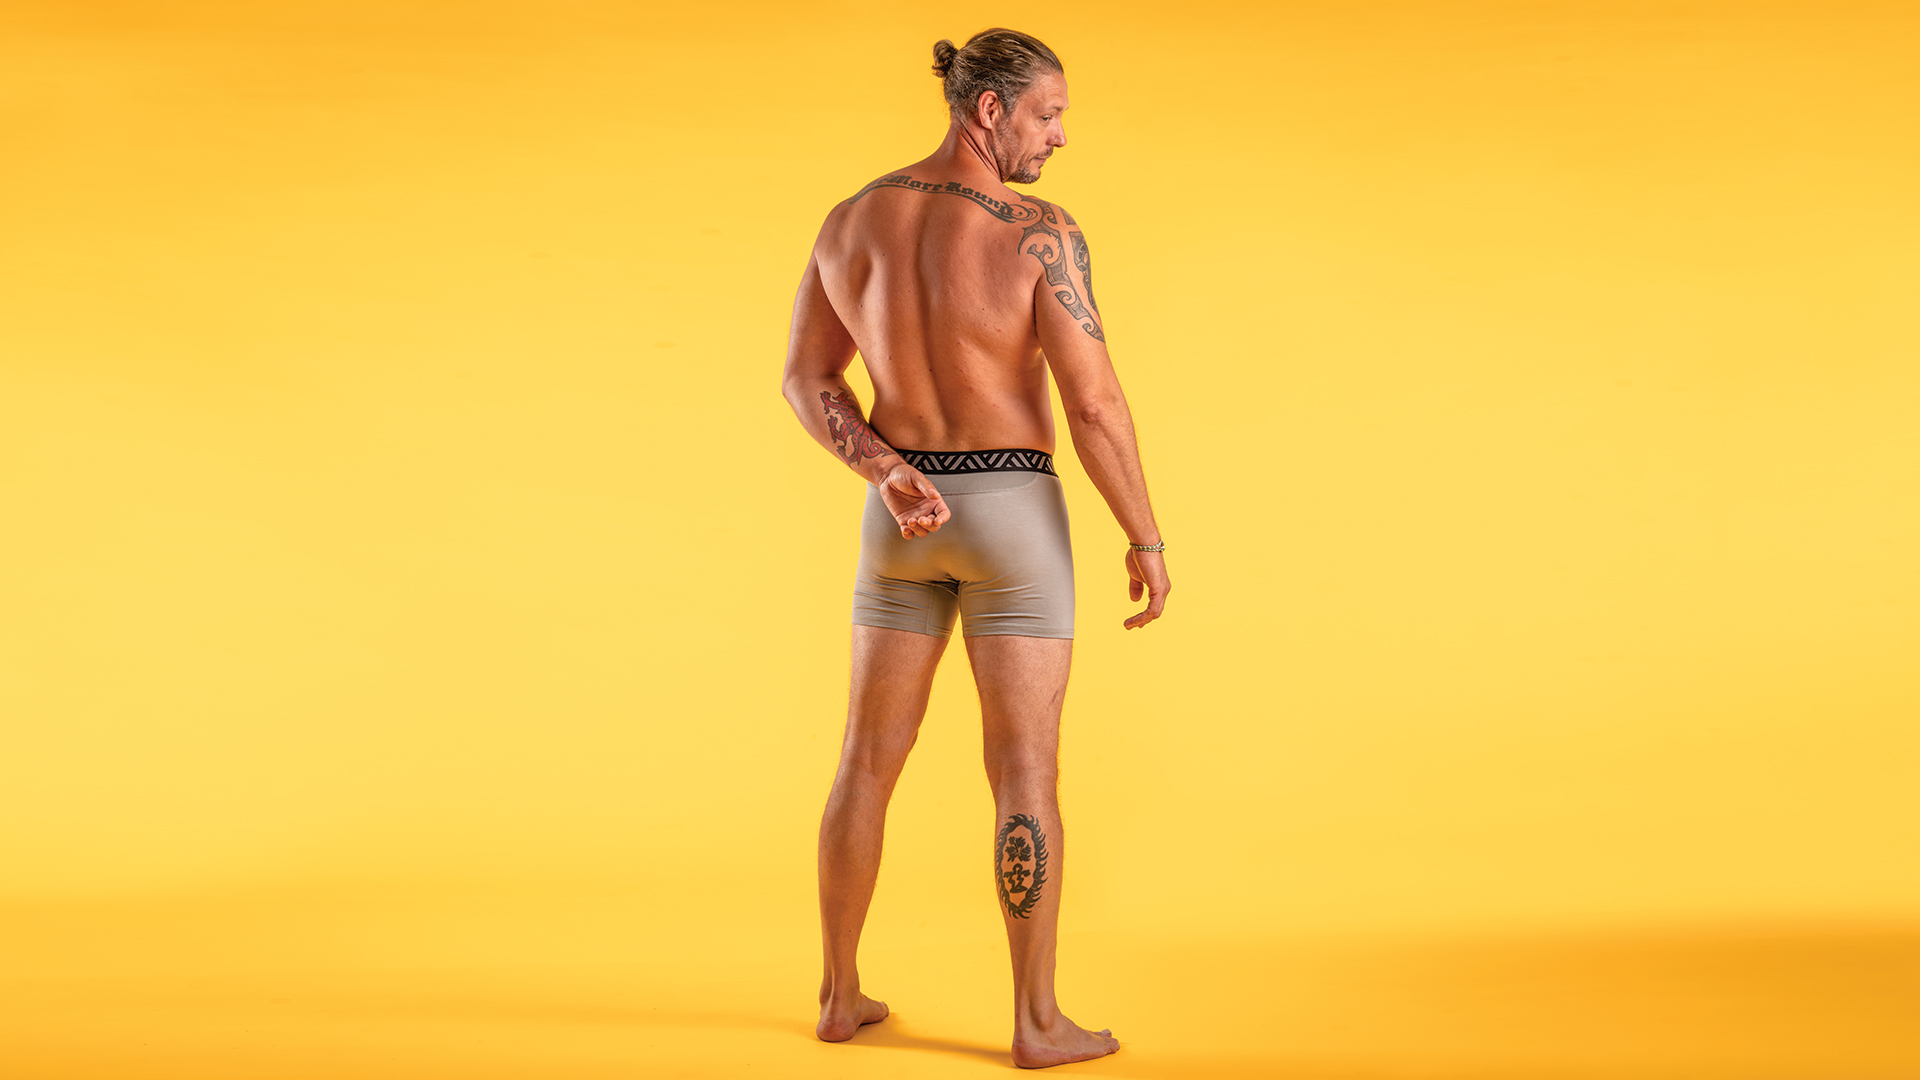 Cool loincloths breathe new life into Japan underwear market - The